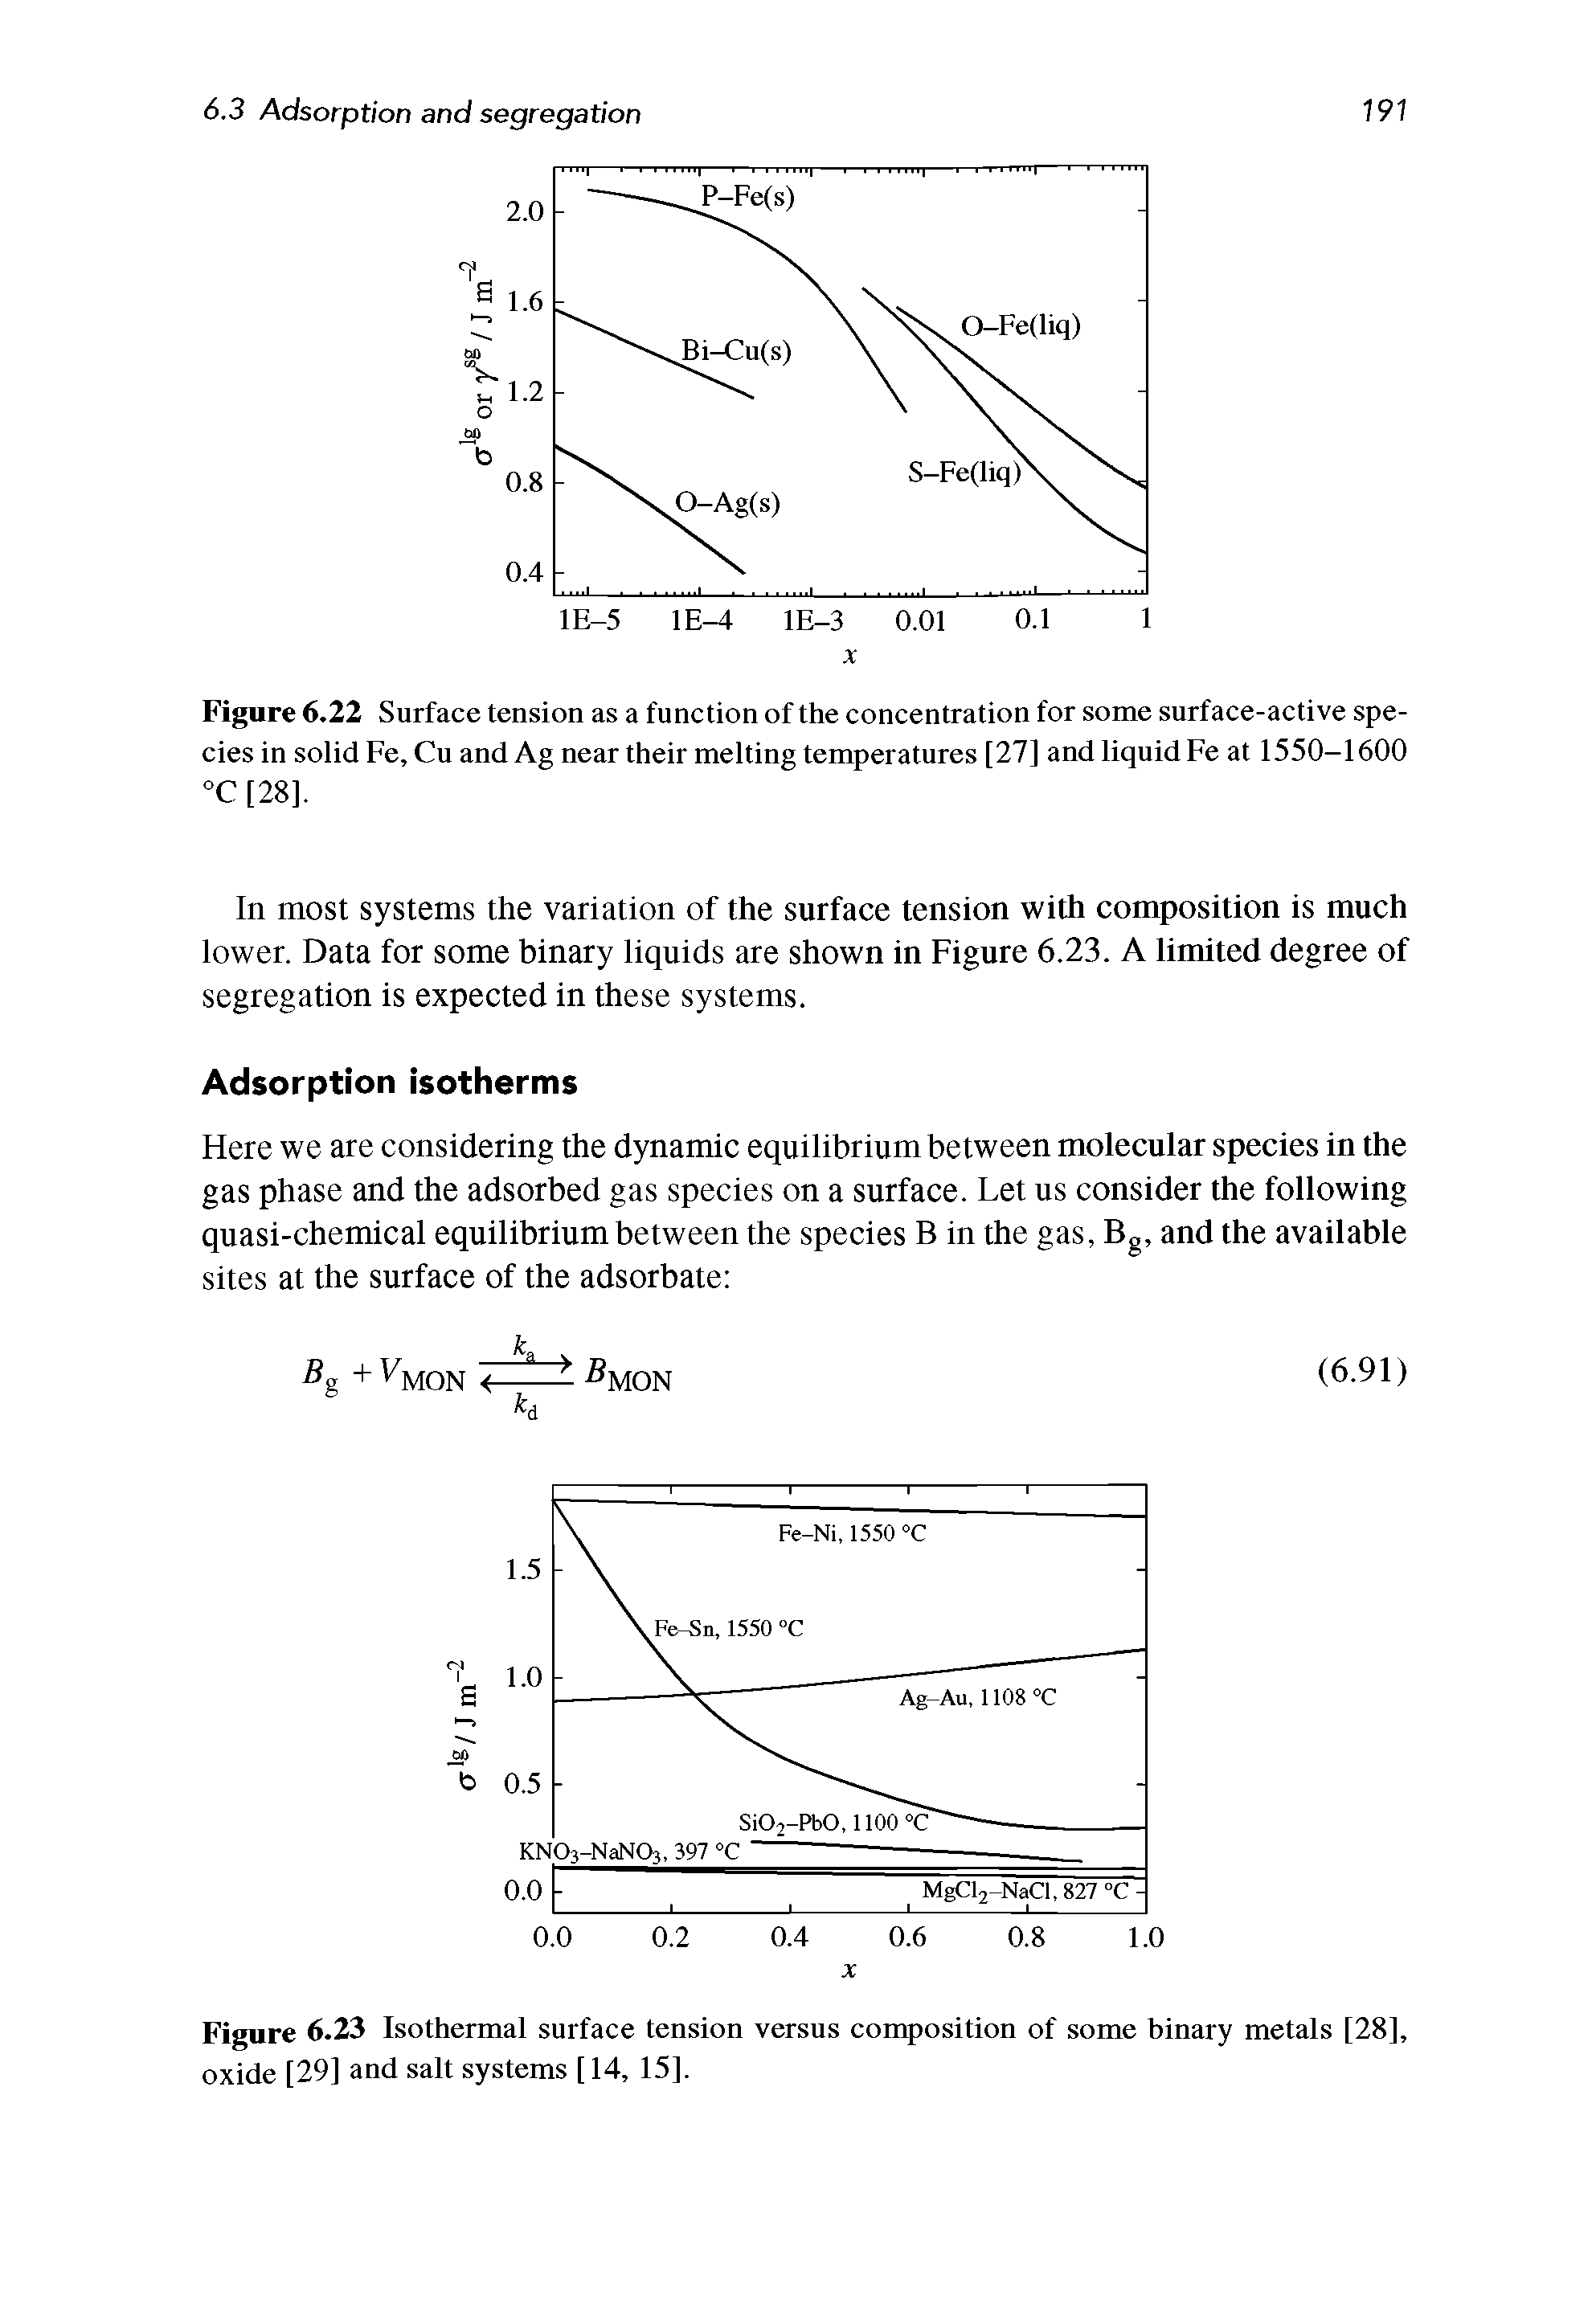 Figure 6.22 Surface tension as a function of the concentration for some surface-active species in solid Fe, Cu and Ag near their melting temperatures [27] and liquid Fe at 1550-1600 °C [28],...